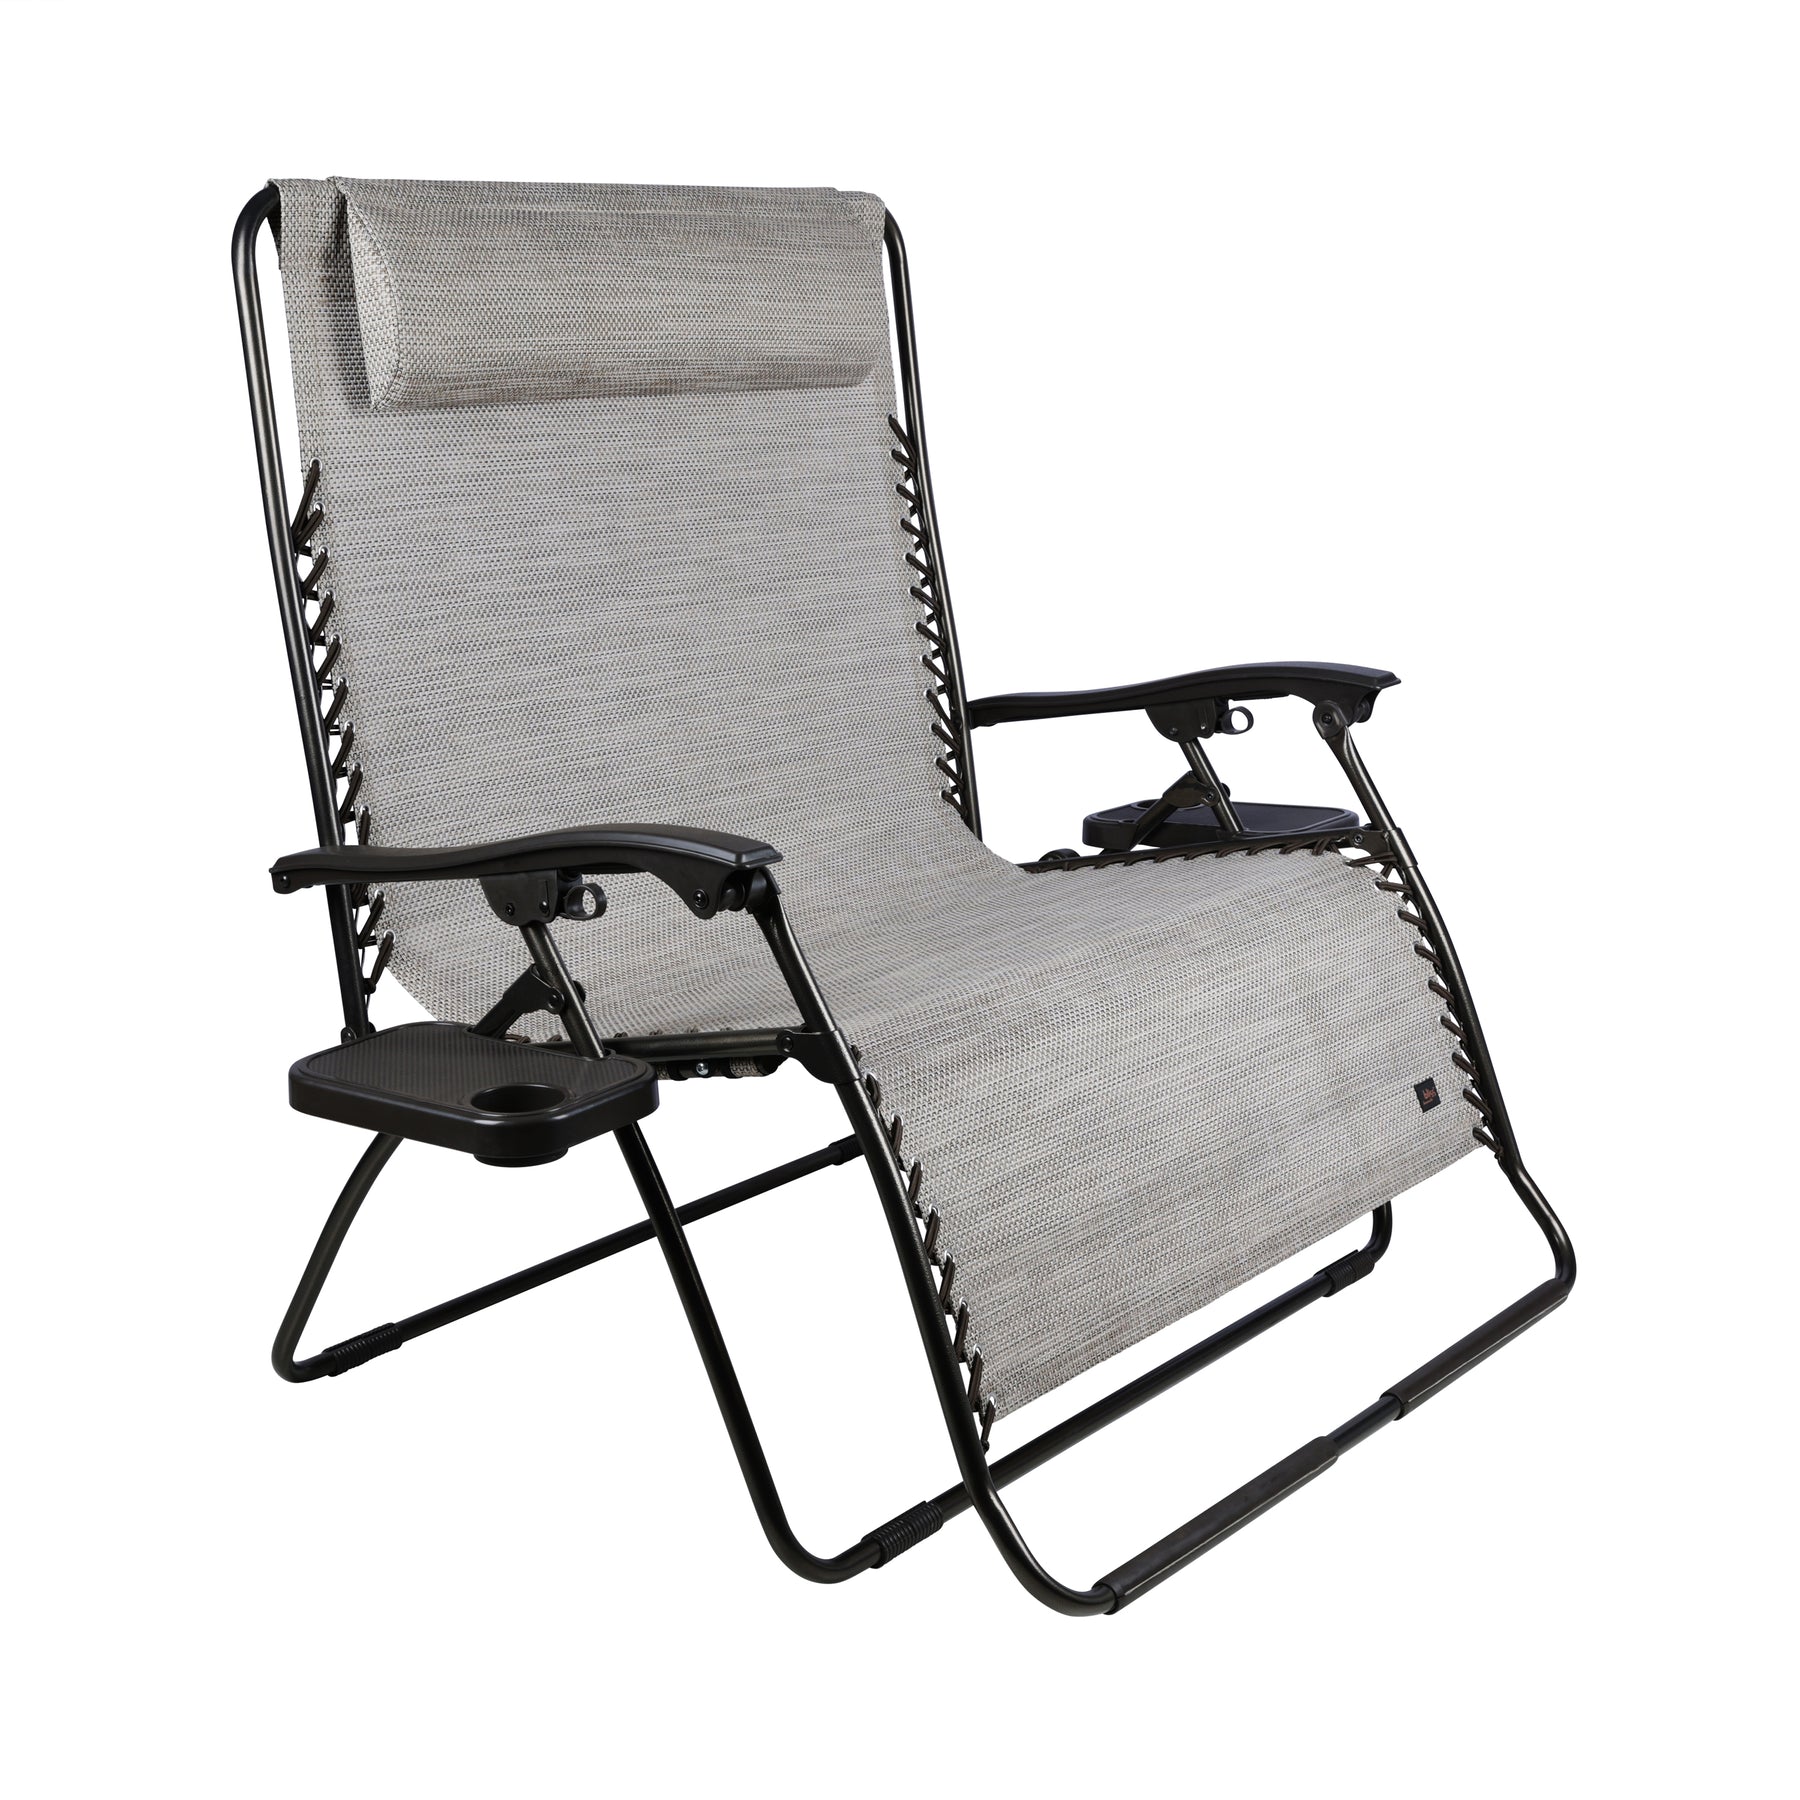 Bliss Hammocks 45-inch Wide 2-Person Zero Gravity Chair with Pillow and Drink Tray in the sand variation.